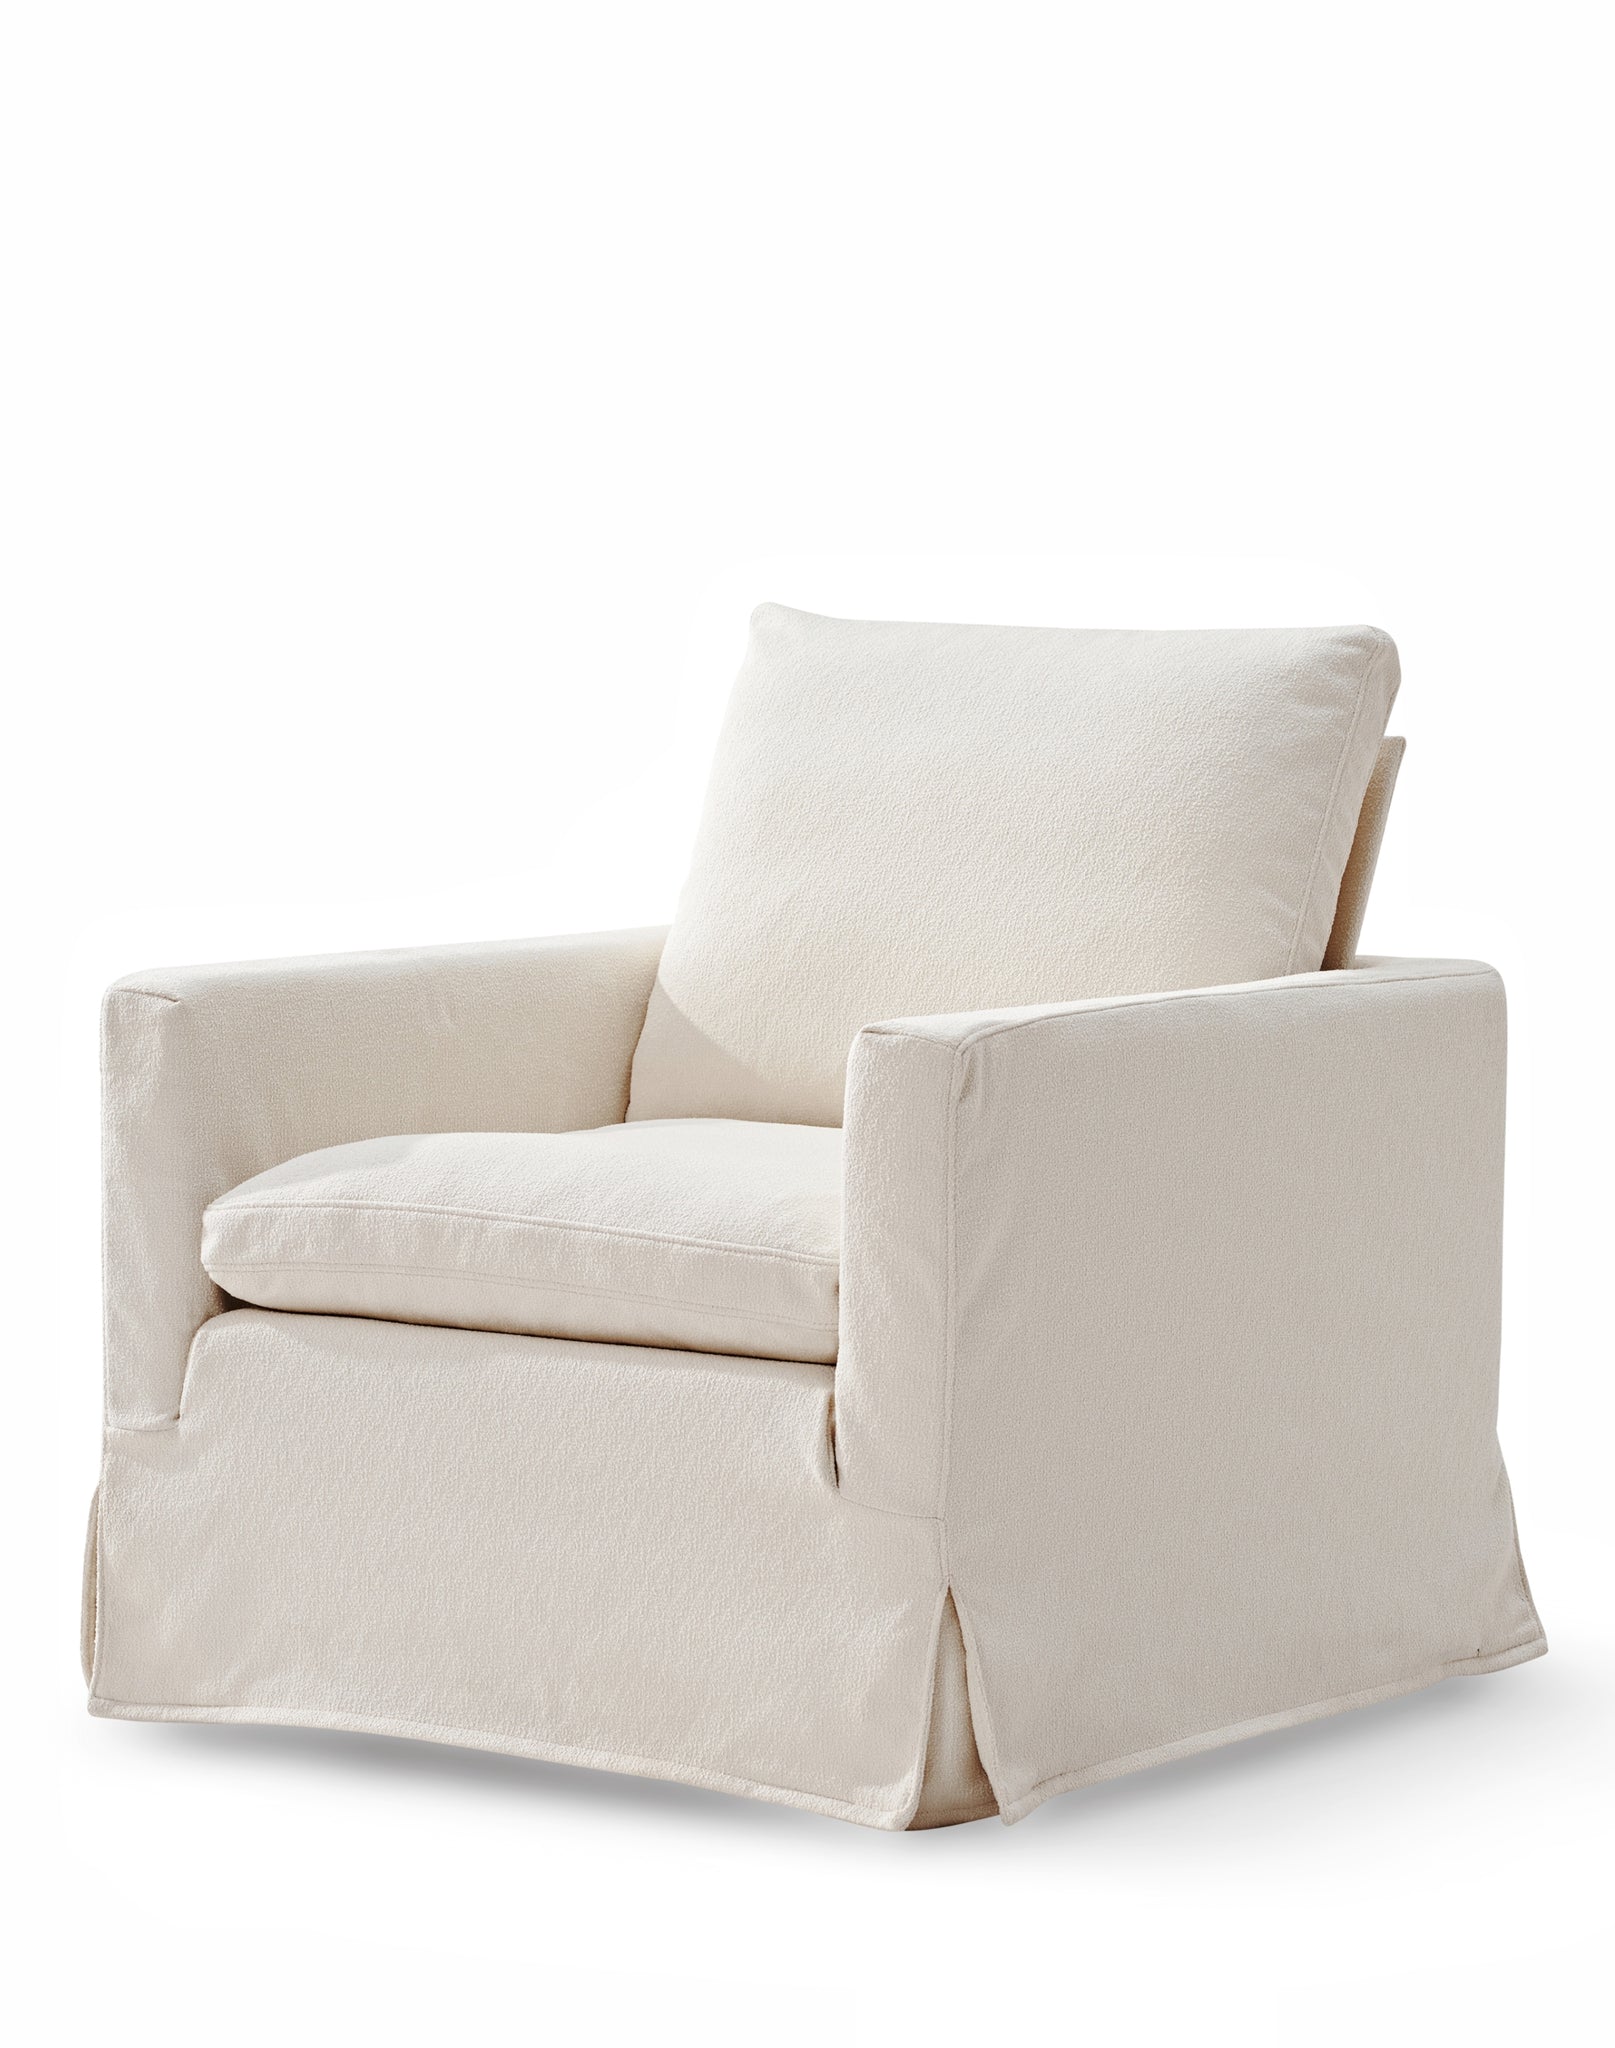 Swivel Chair with Loose Cover, Beige Fabric, Solid beige-primary living